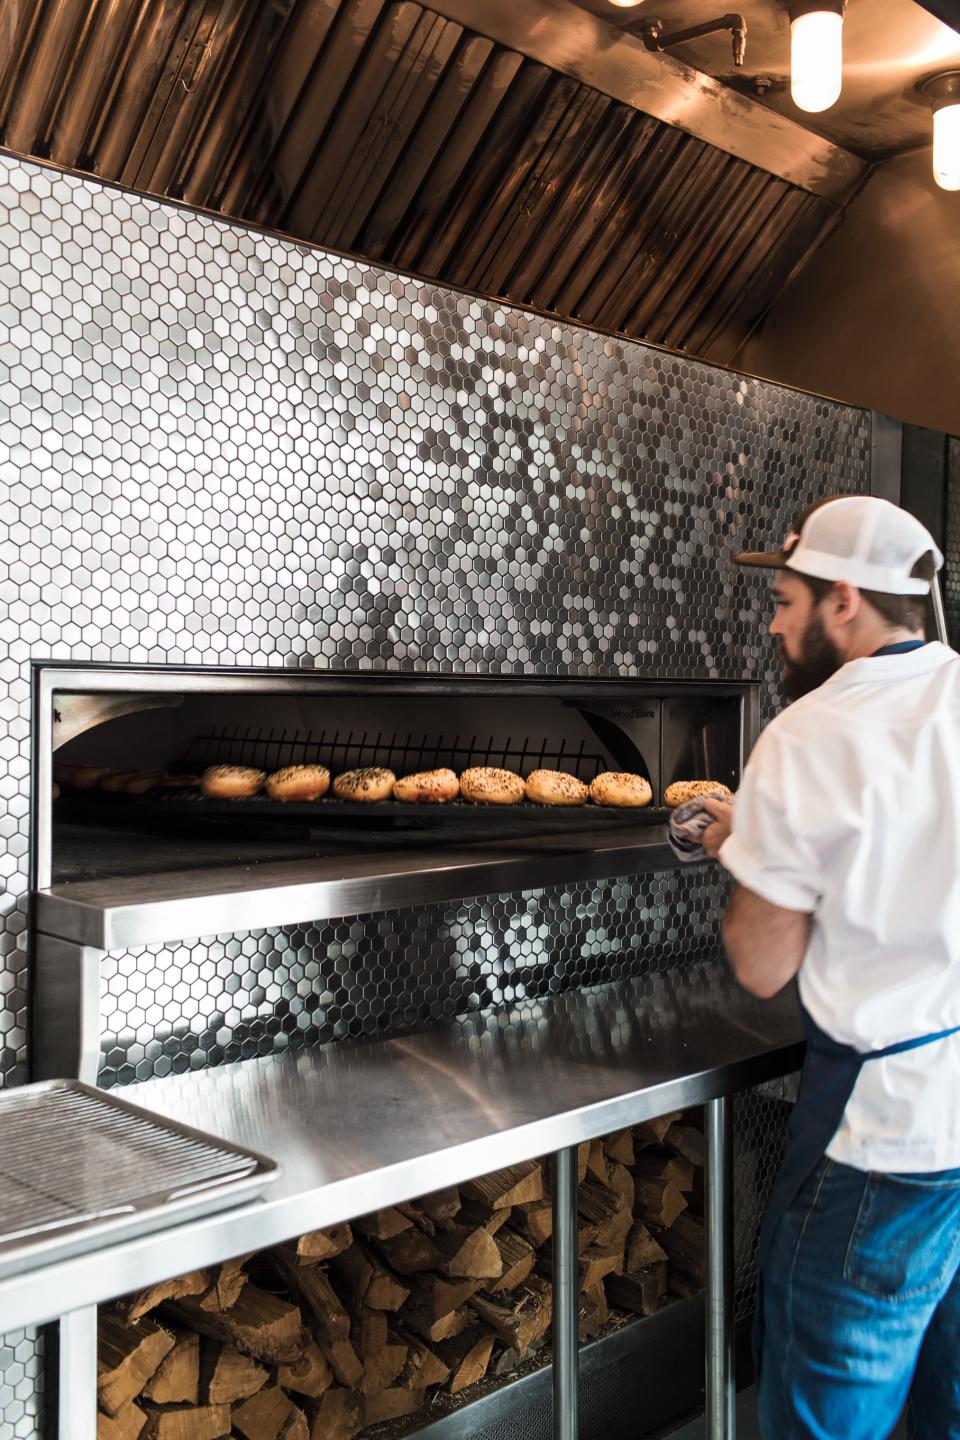 Bagels coming out of the oven at Meyvn.